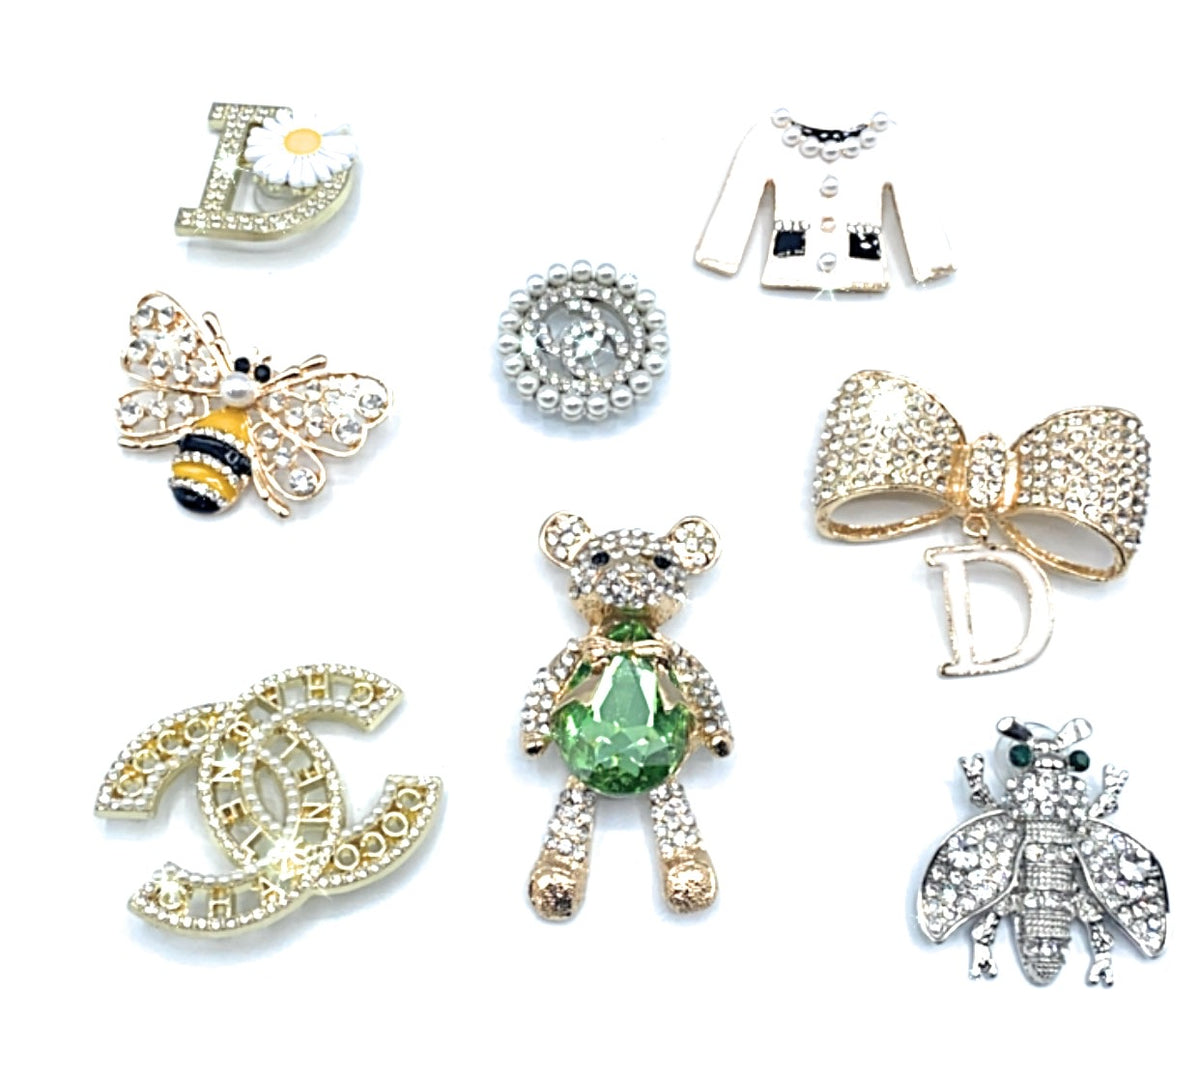 12 Piece Bling Croc Charms, Crystal Croc Charms, Luxury Rhinestones and Gold